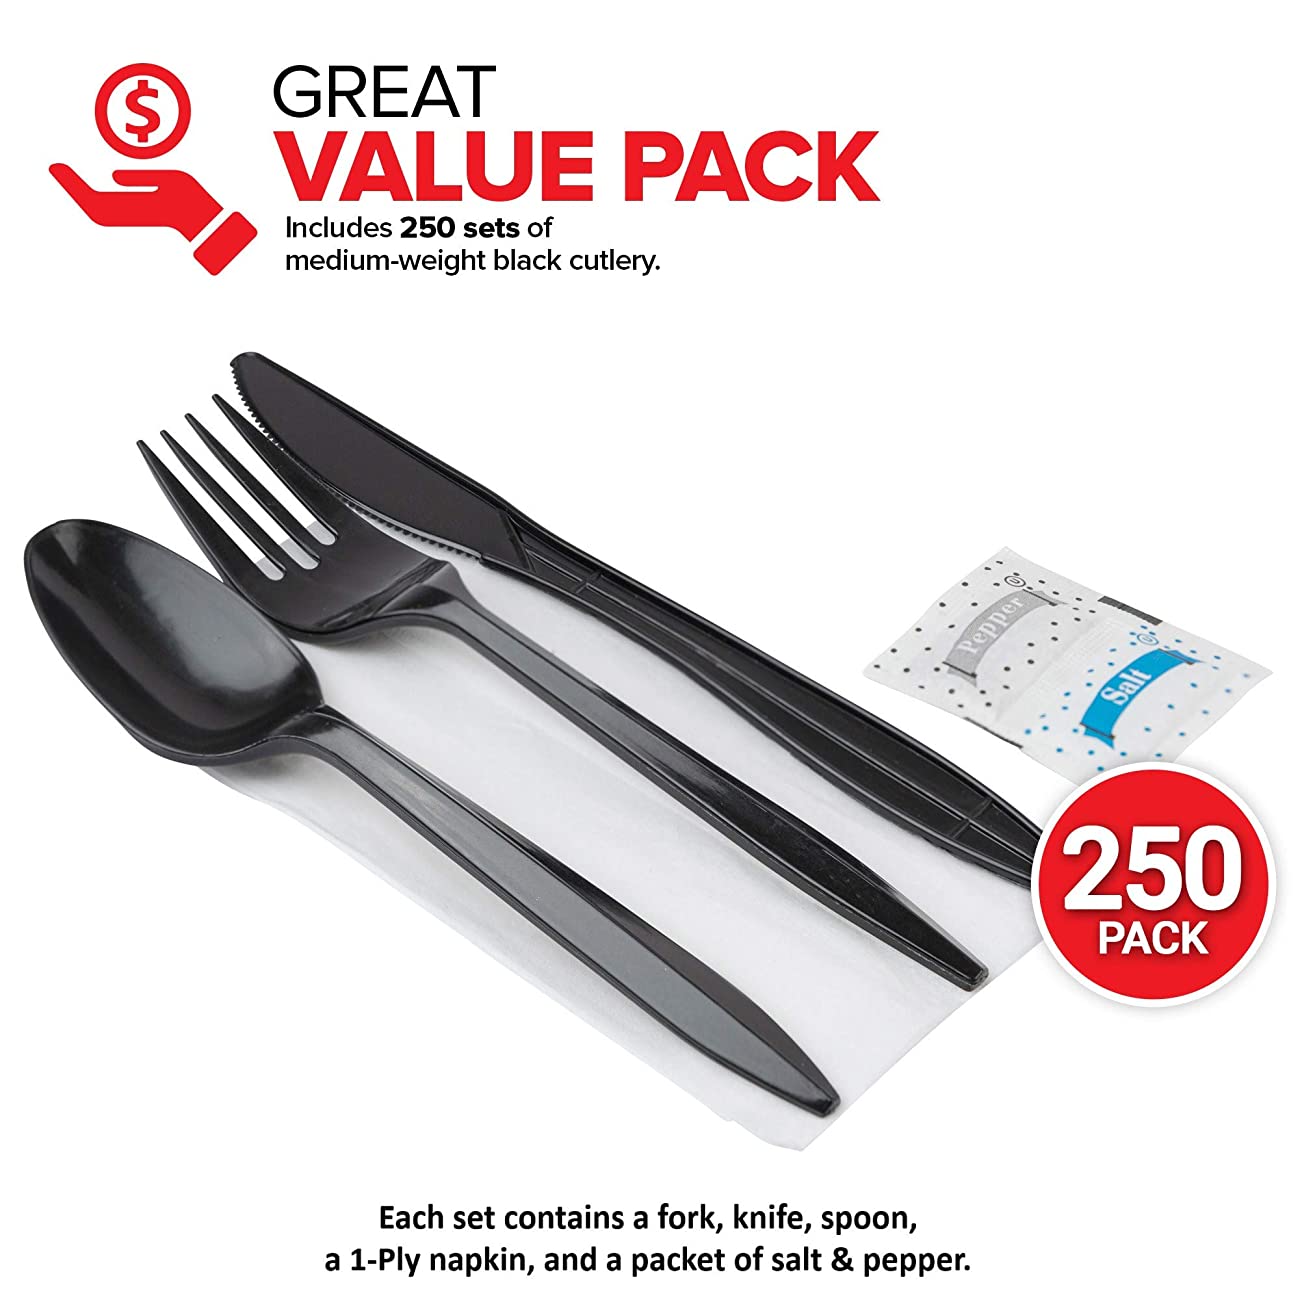 Stock Your Home 160 Piece Plastic Silverware Set Includes: 80 Forks, 4